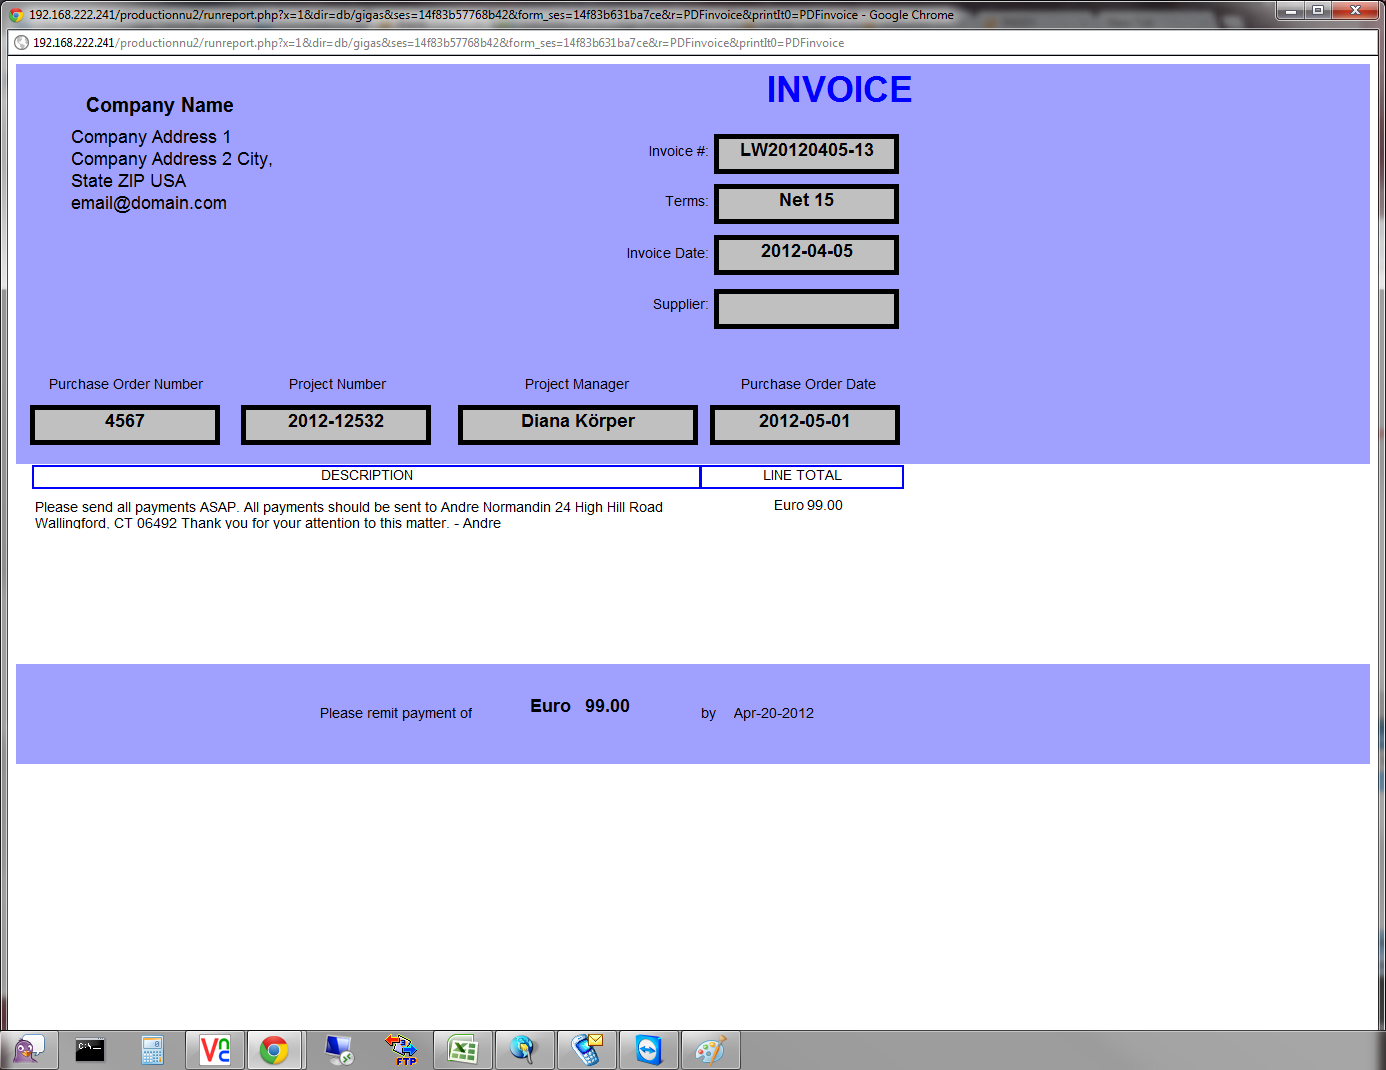 html-invoice.png